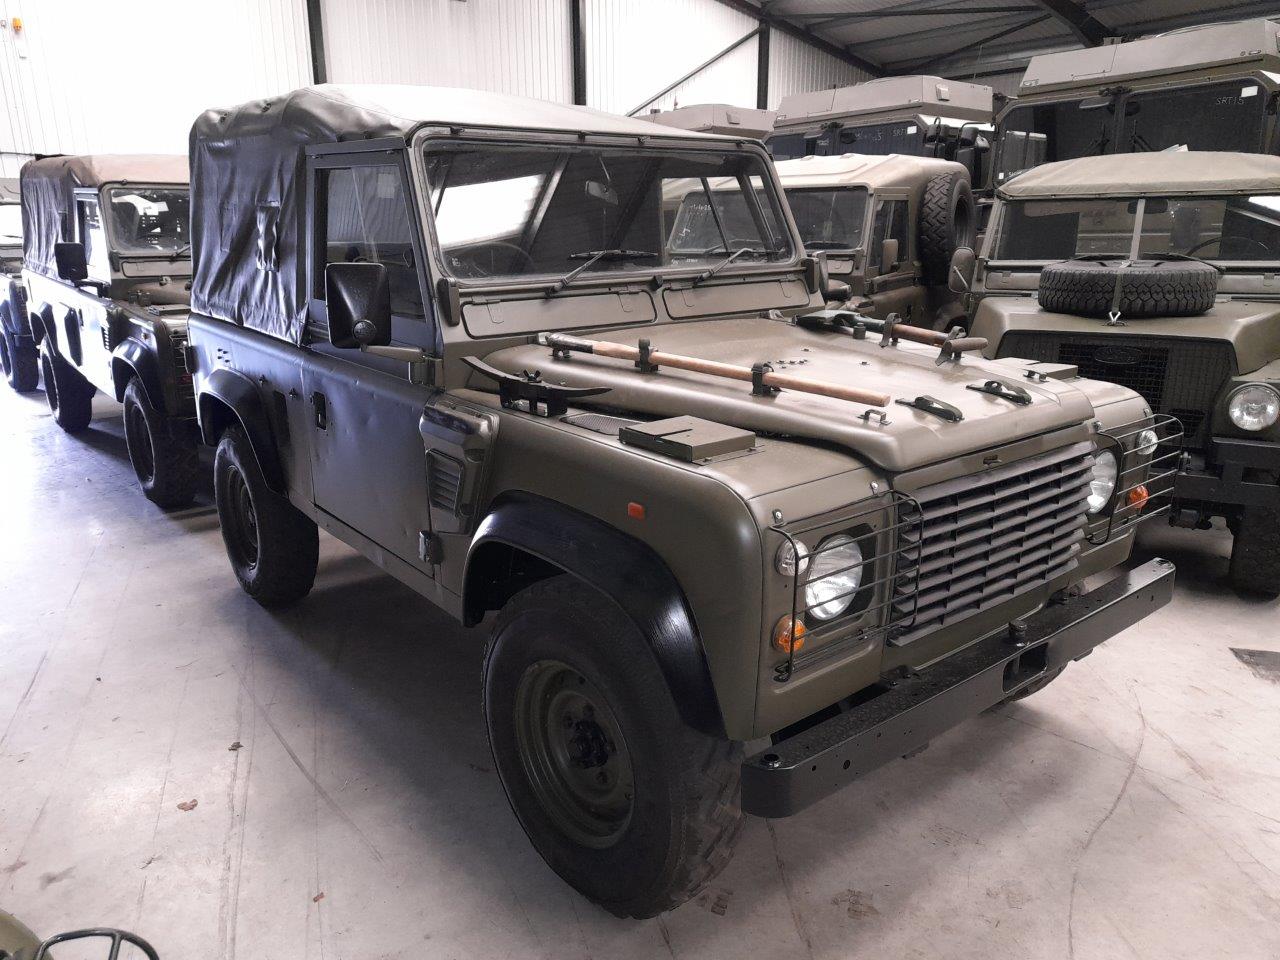 Land Rover Defender 90 Wolf  RHD Soft Top (Remus) - ex military vehicles for sale, mod surplus